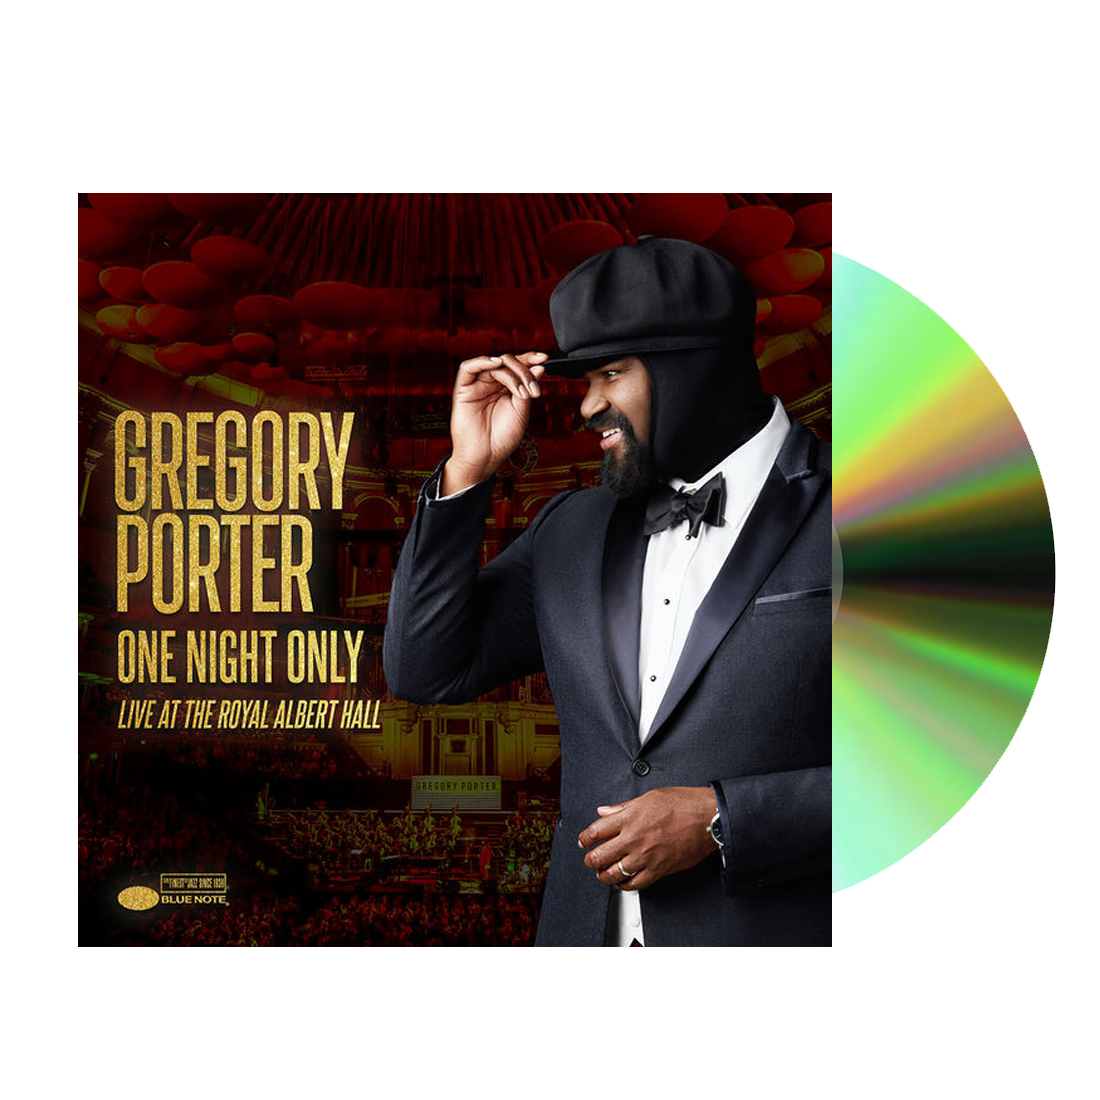 One Night Only - Live at the Royal Albert Hall UK ONLY